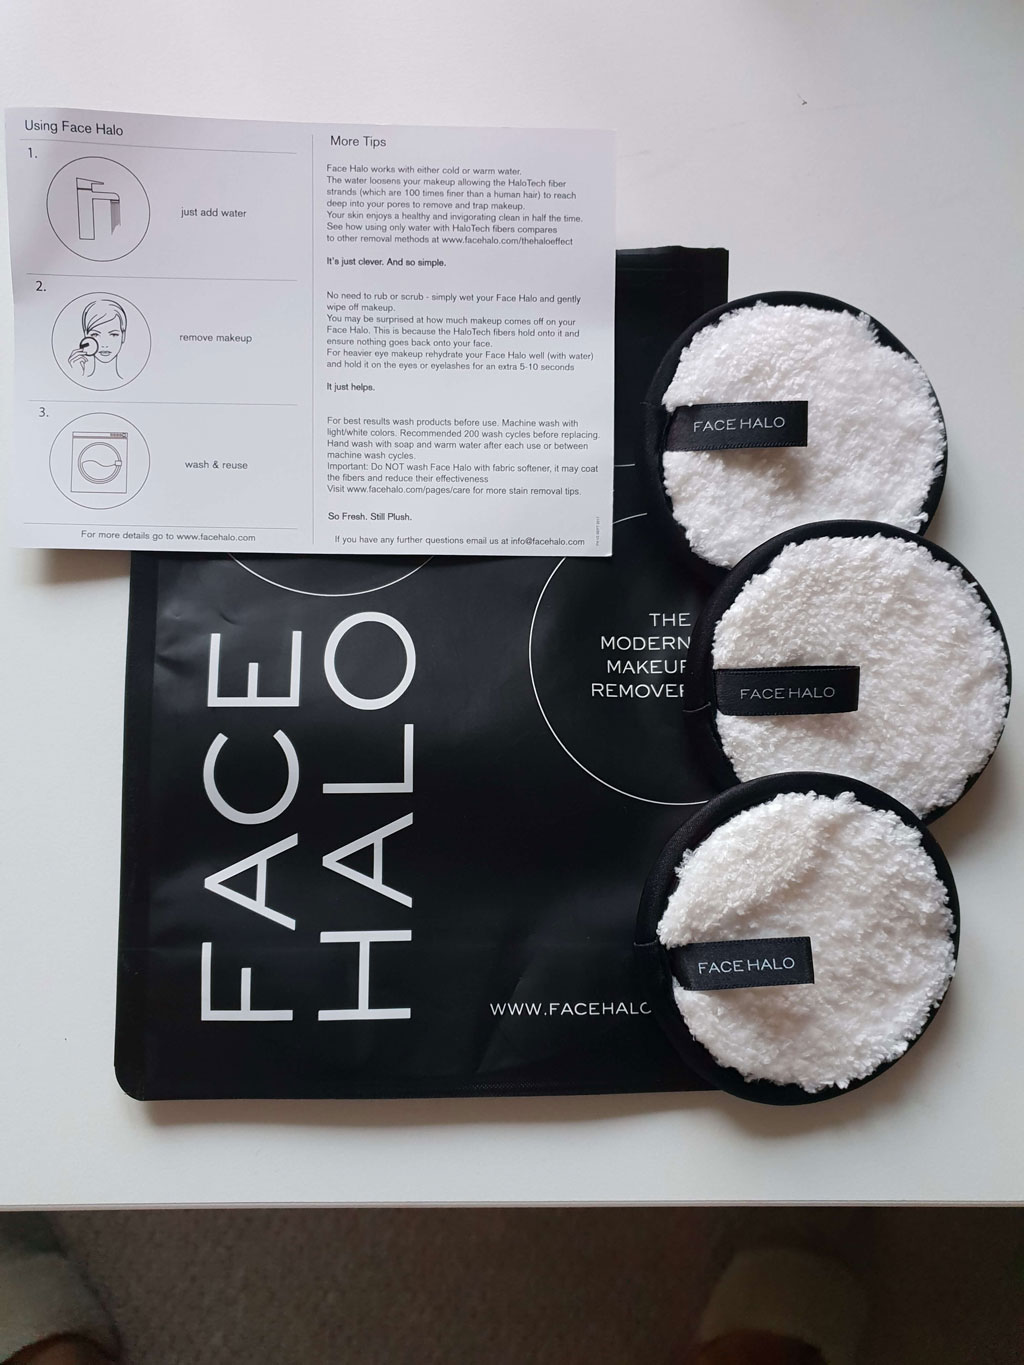 Face Halo set to remove makeup